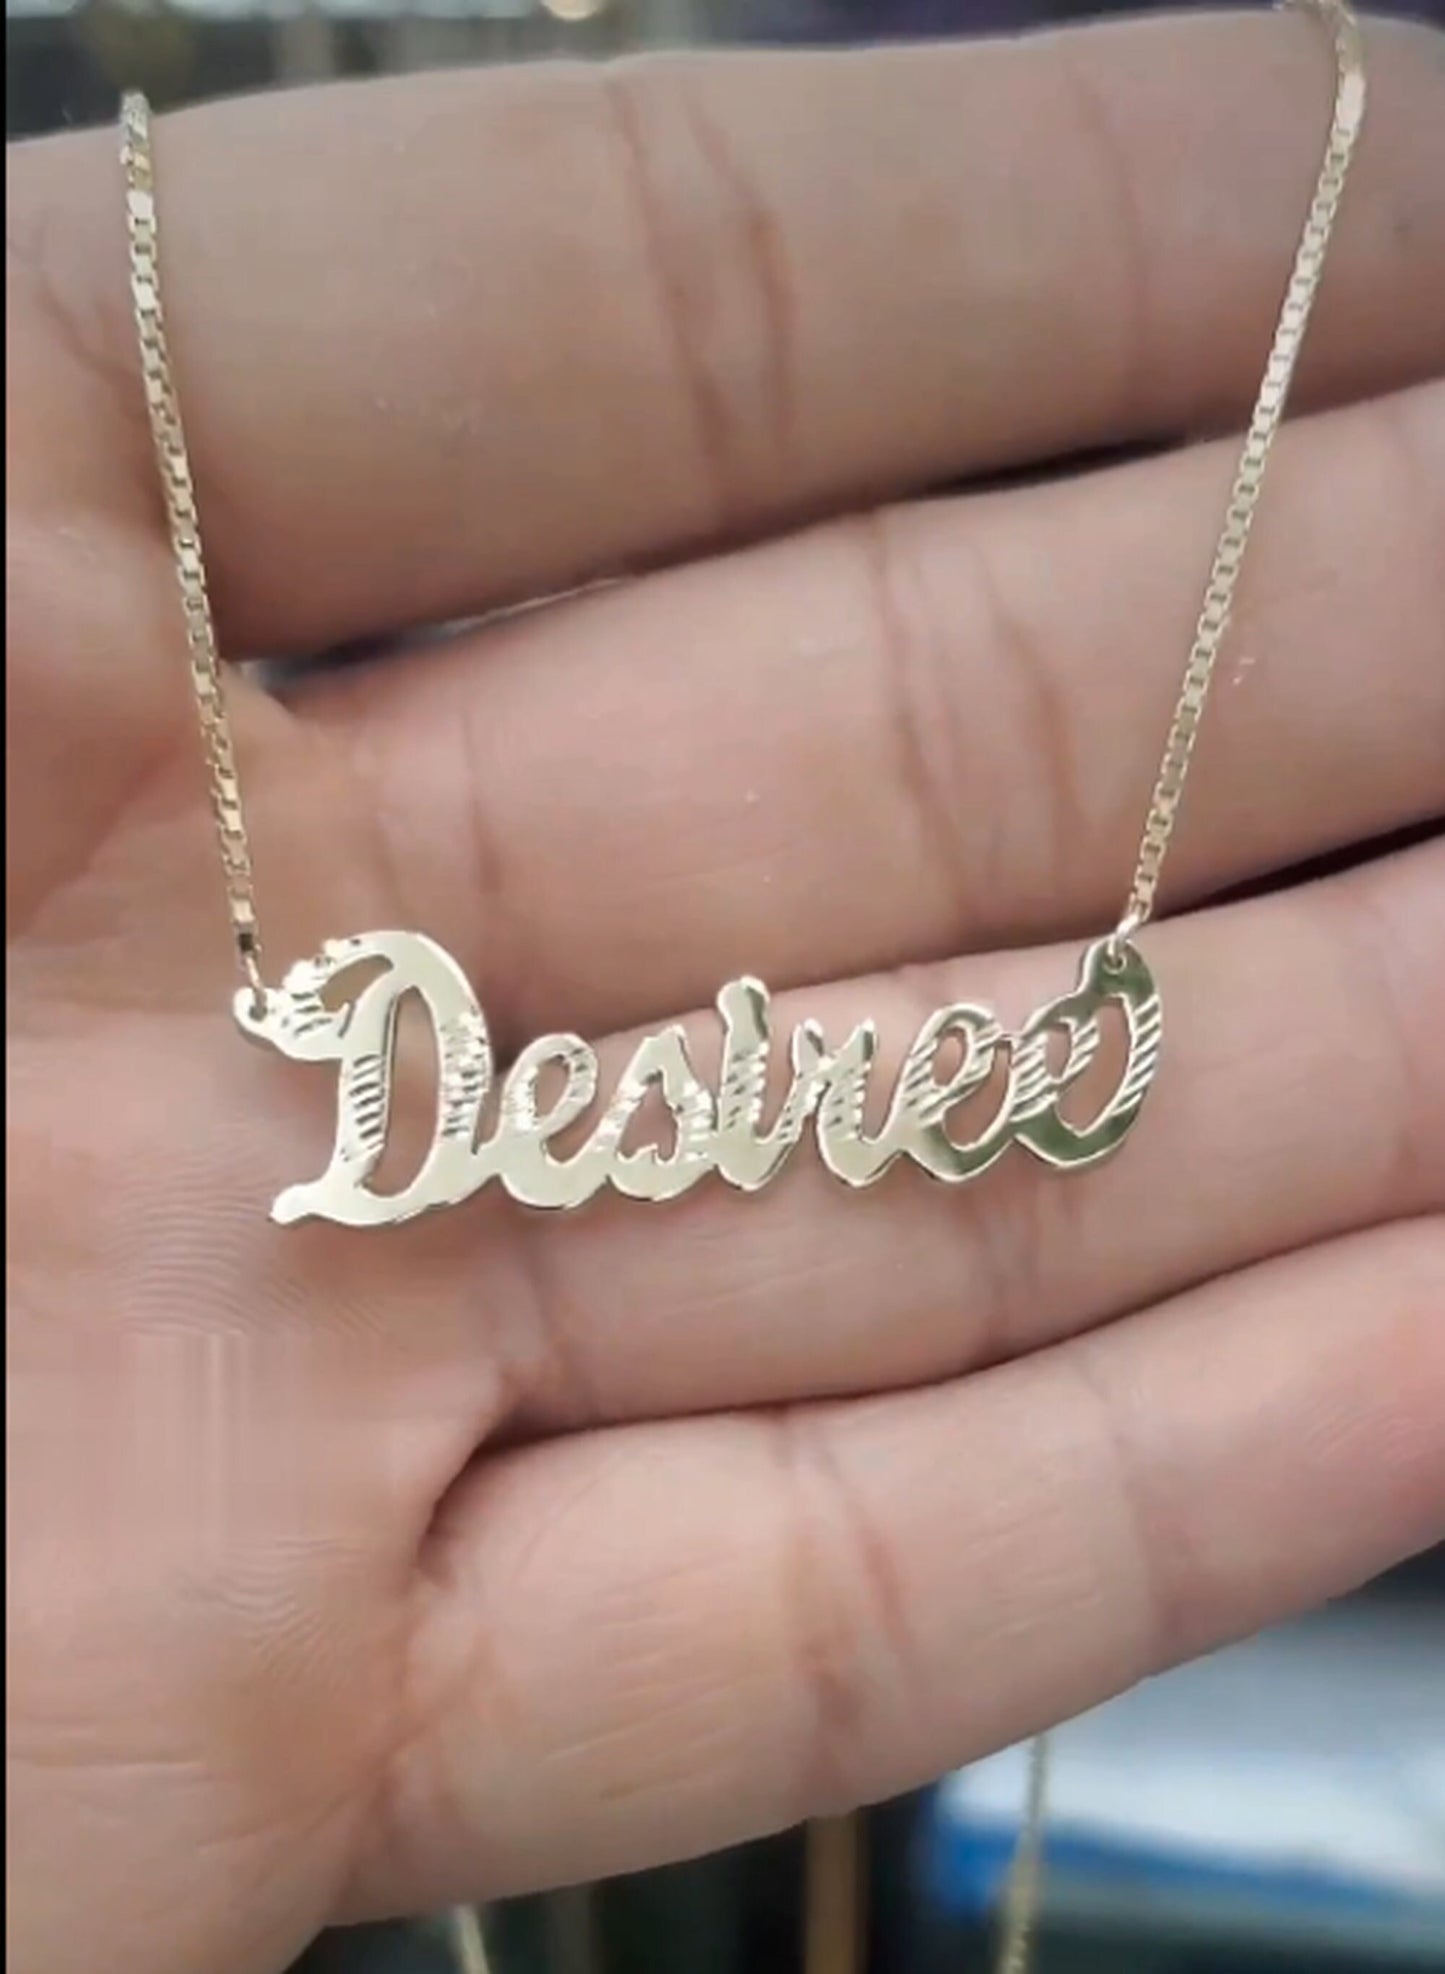 10K 14K Solid Real Gold Customized Name Pendant Cursive Letters With Box Chain Necklace Diamond Cut Jewelry Personalized Gift For Her